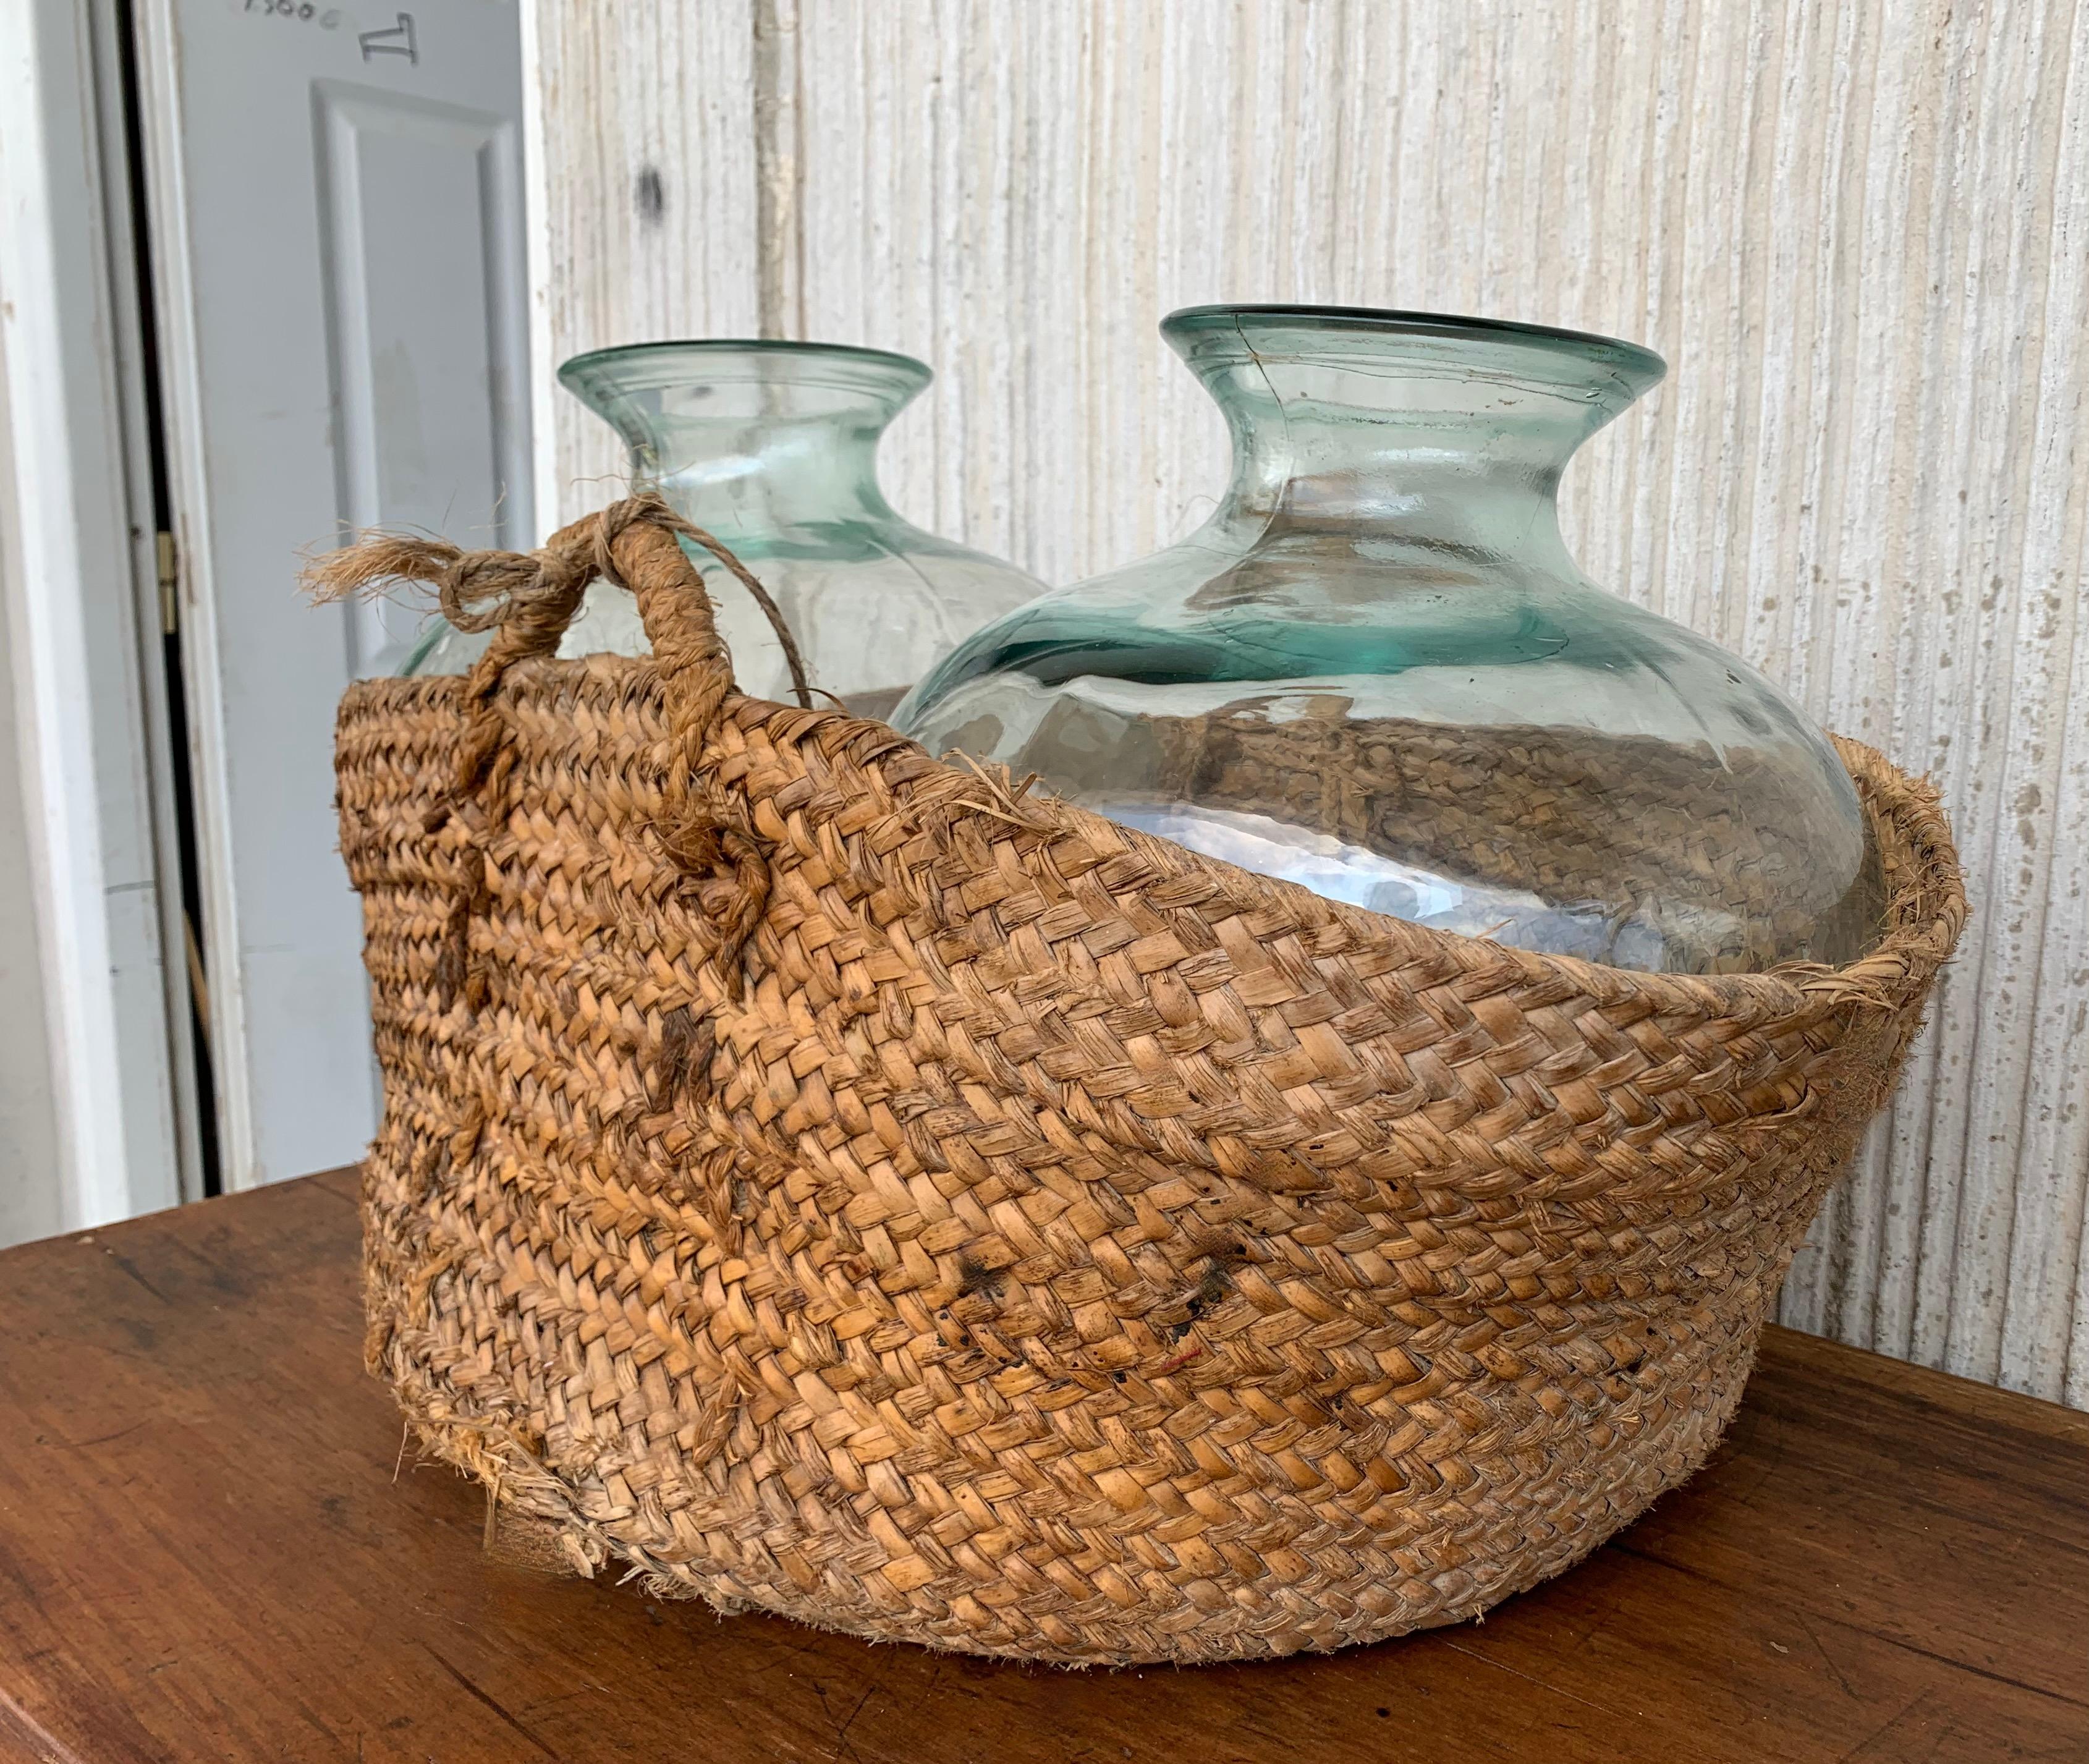 Spanish Set of 2 Green Glass French Demijohn Bottles with Woven Esparto Basket For Sale